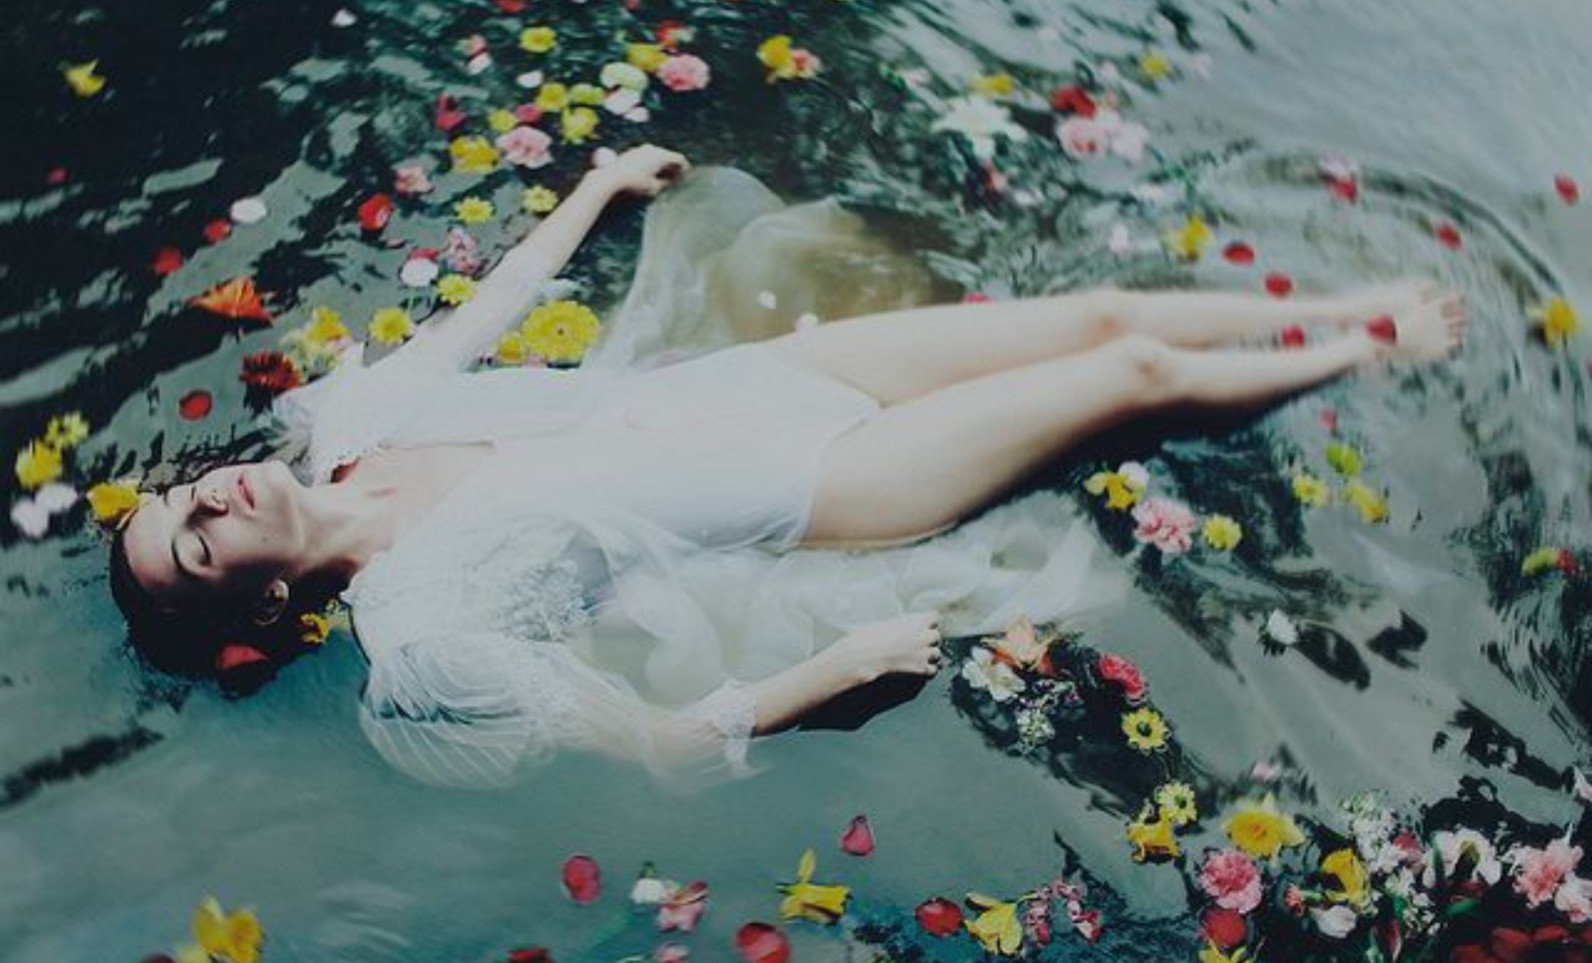 30 Perfect Picture Of Girl Floating In The Water – Artistic, Pleasing, Stunning, Charming, Hot, and Creepy all are here!